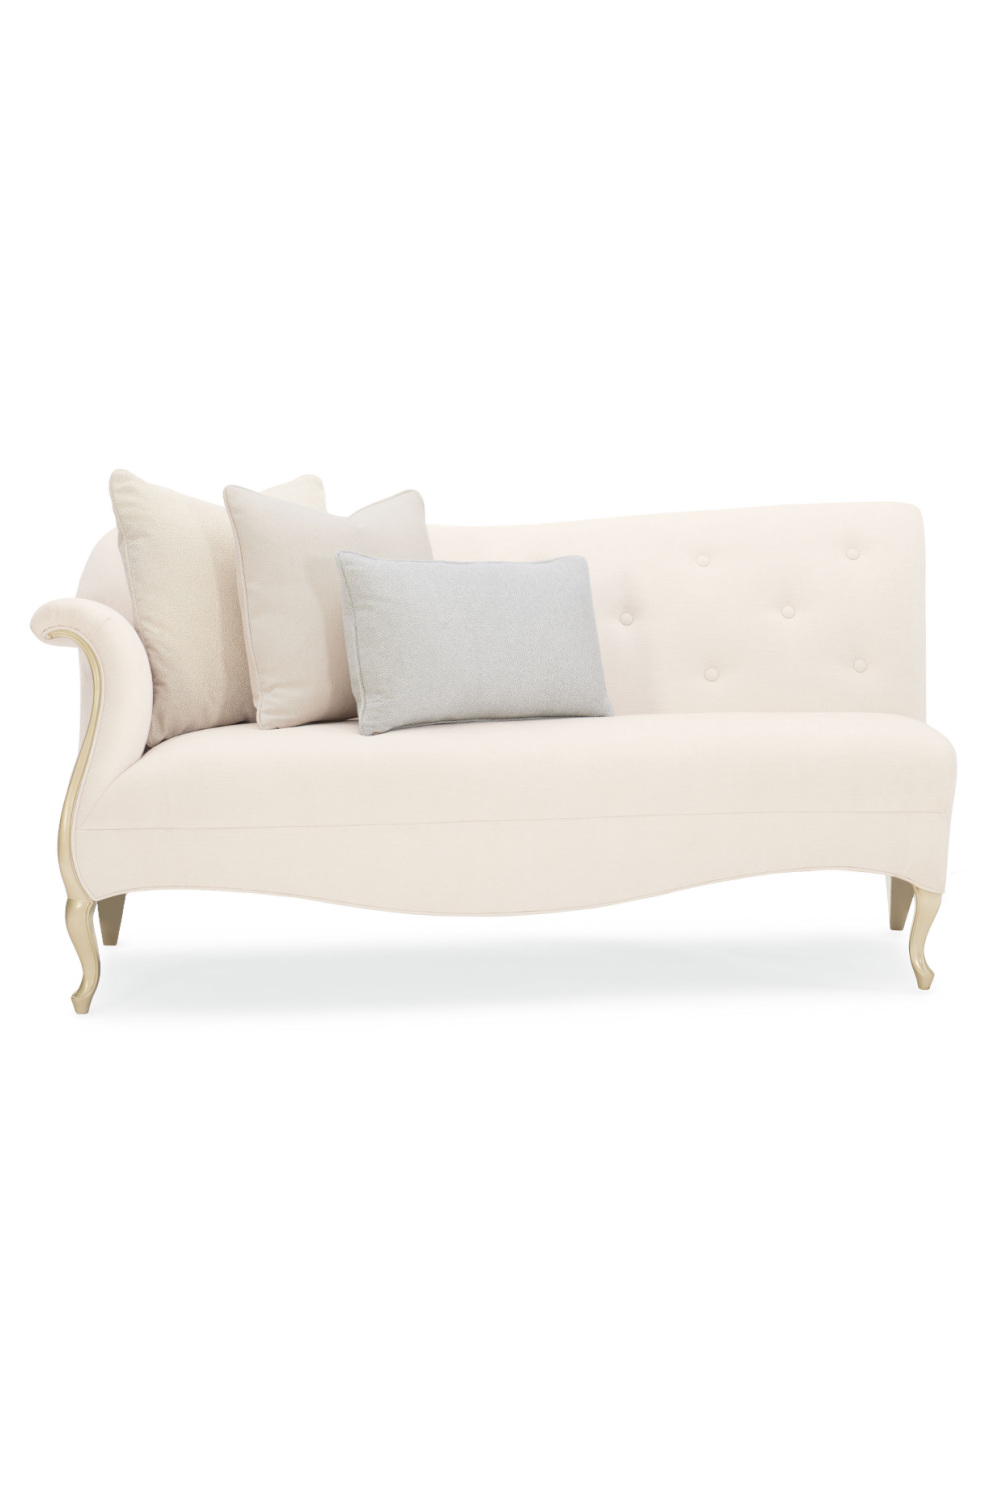 Scrolled Arm Loveseat | Caracole Two To Tango | Oroa.com